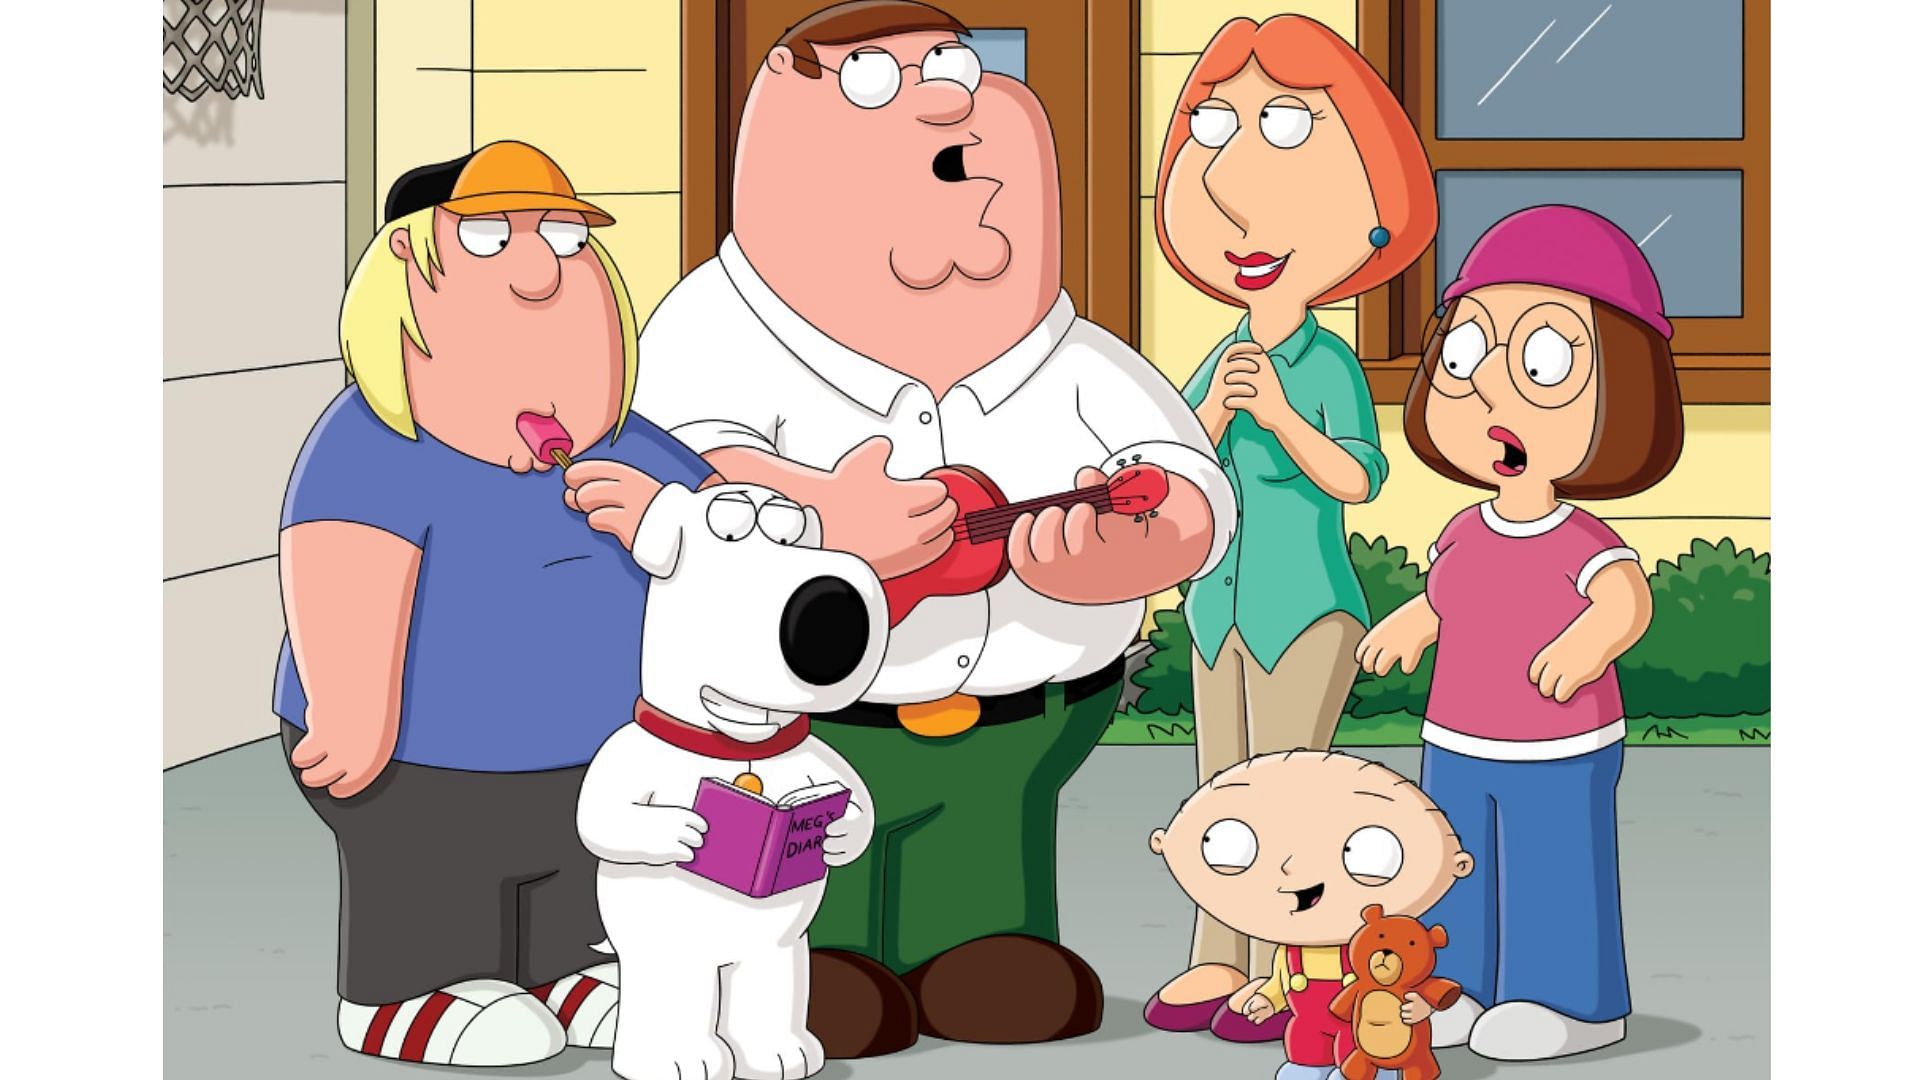 The official synopsis of Family Guy Season 22 episode 5 offers a sneak peek into the show&#039;s trademark humor. (Image via Fox)